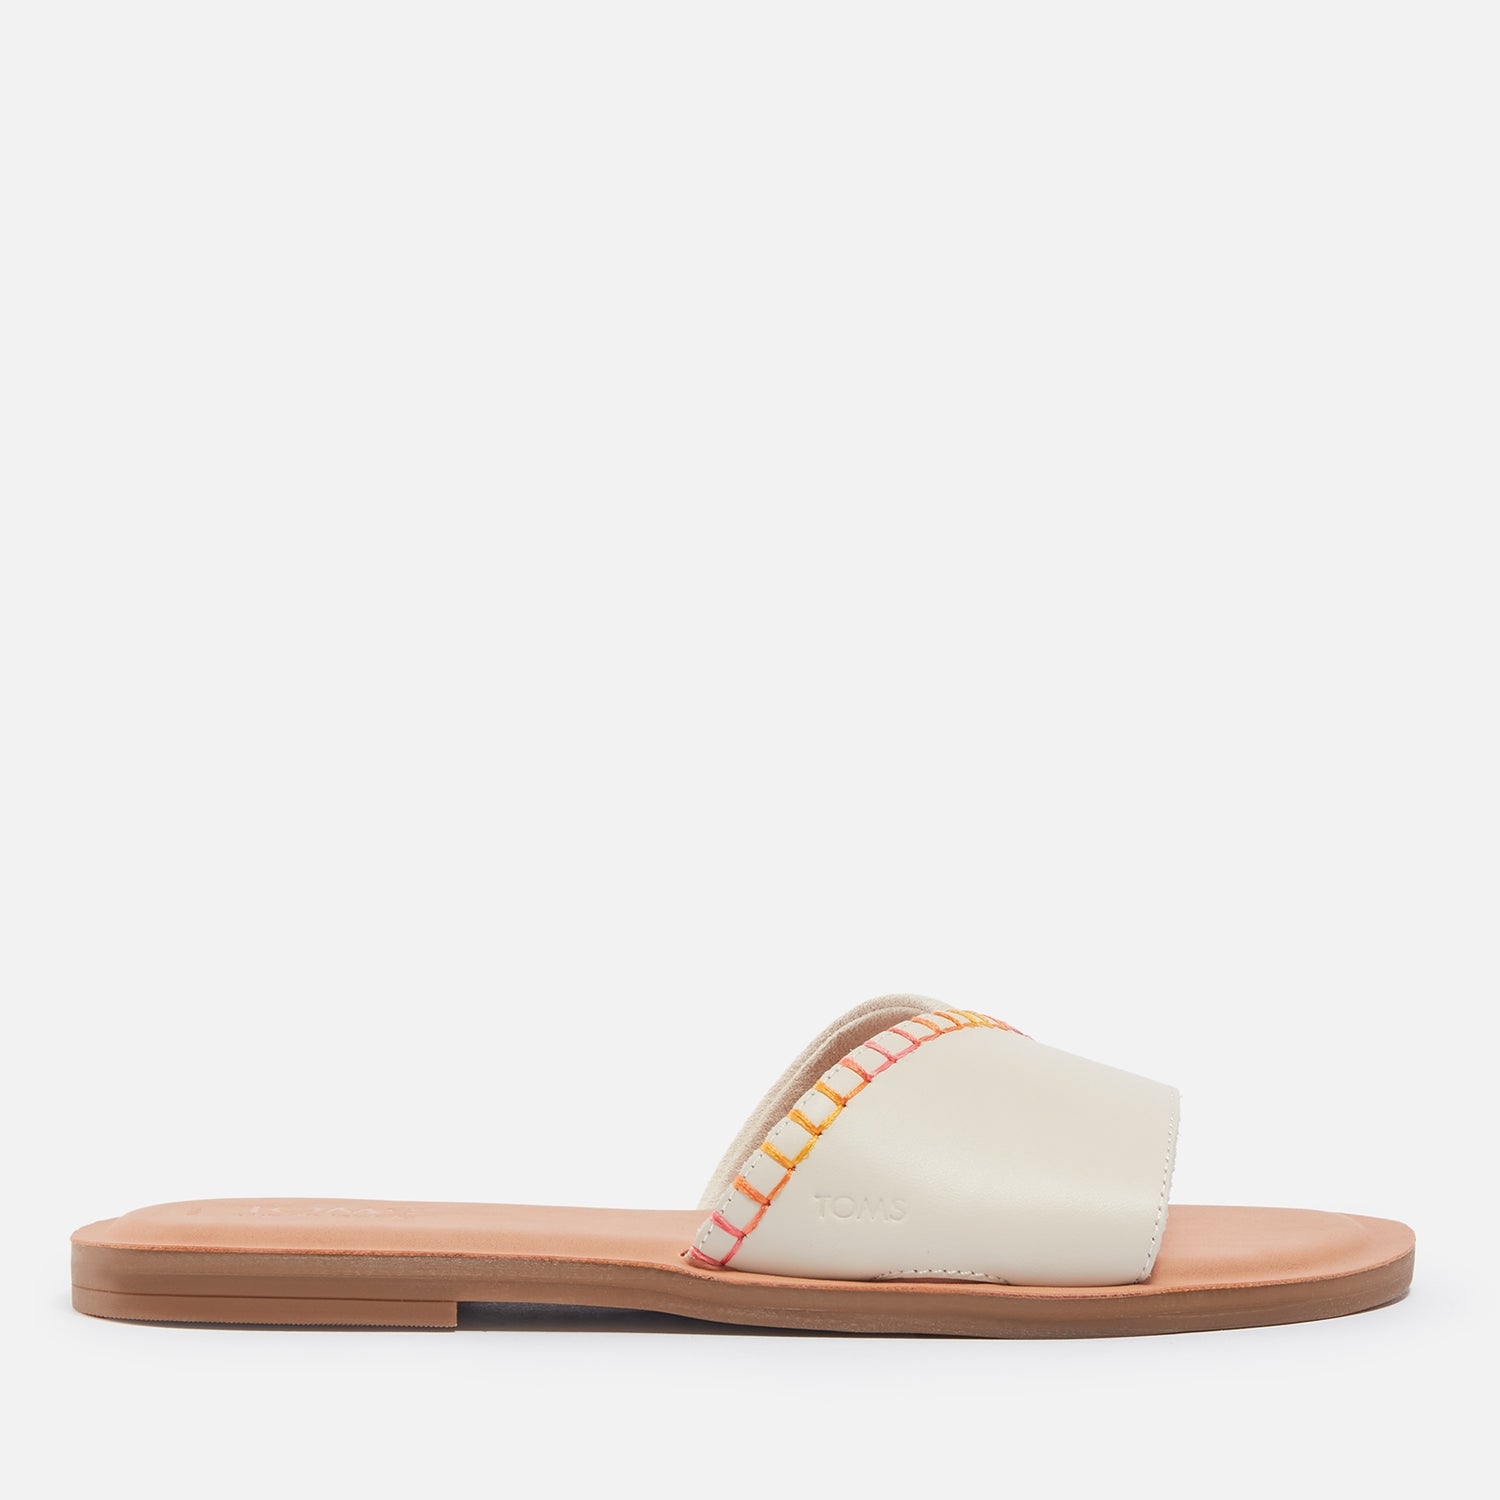 TOMS Women's Shea Leather and Suede Sandals - UK 3